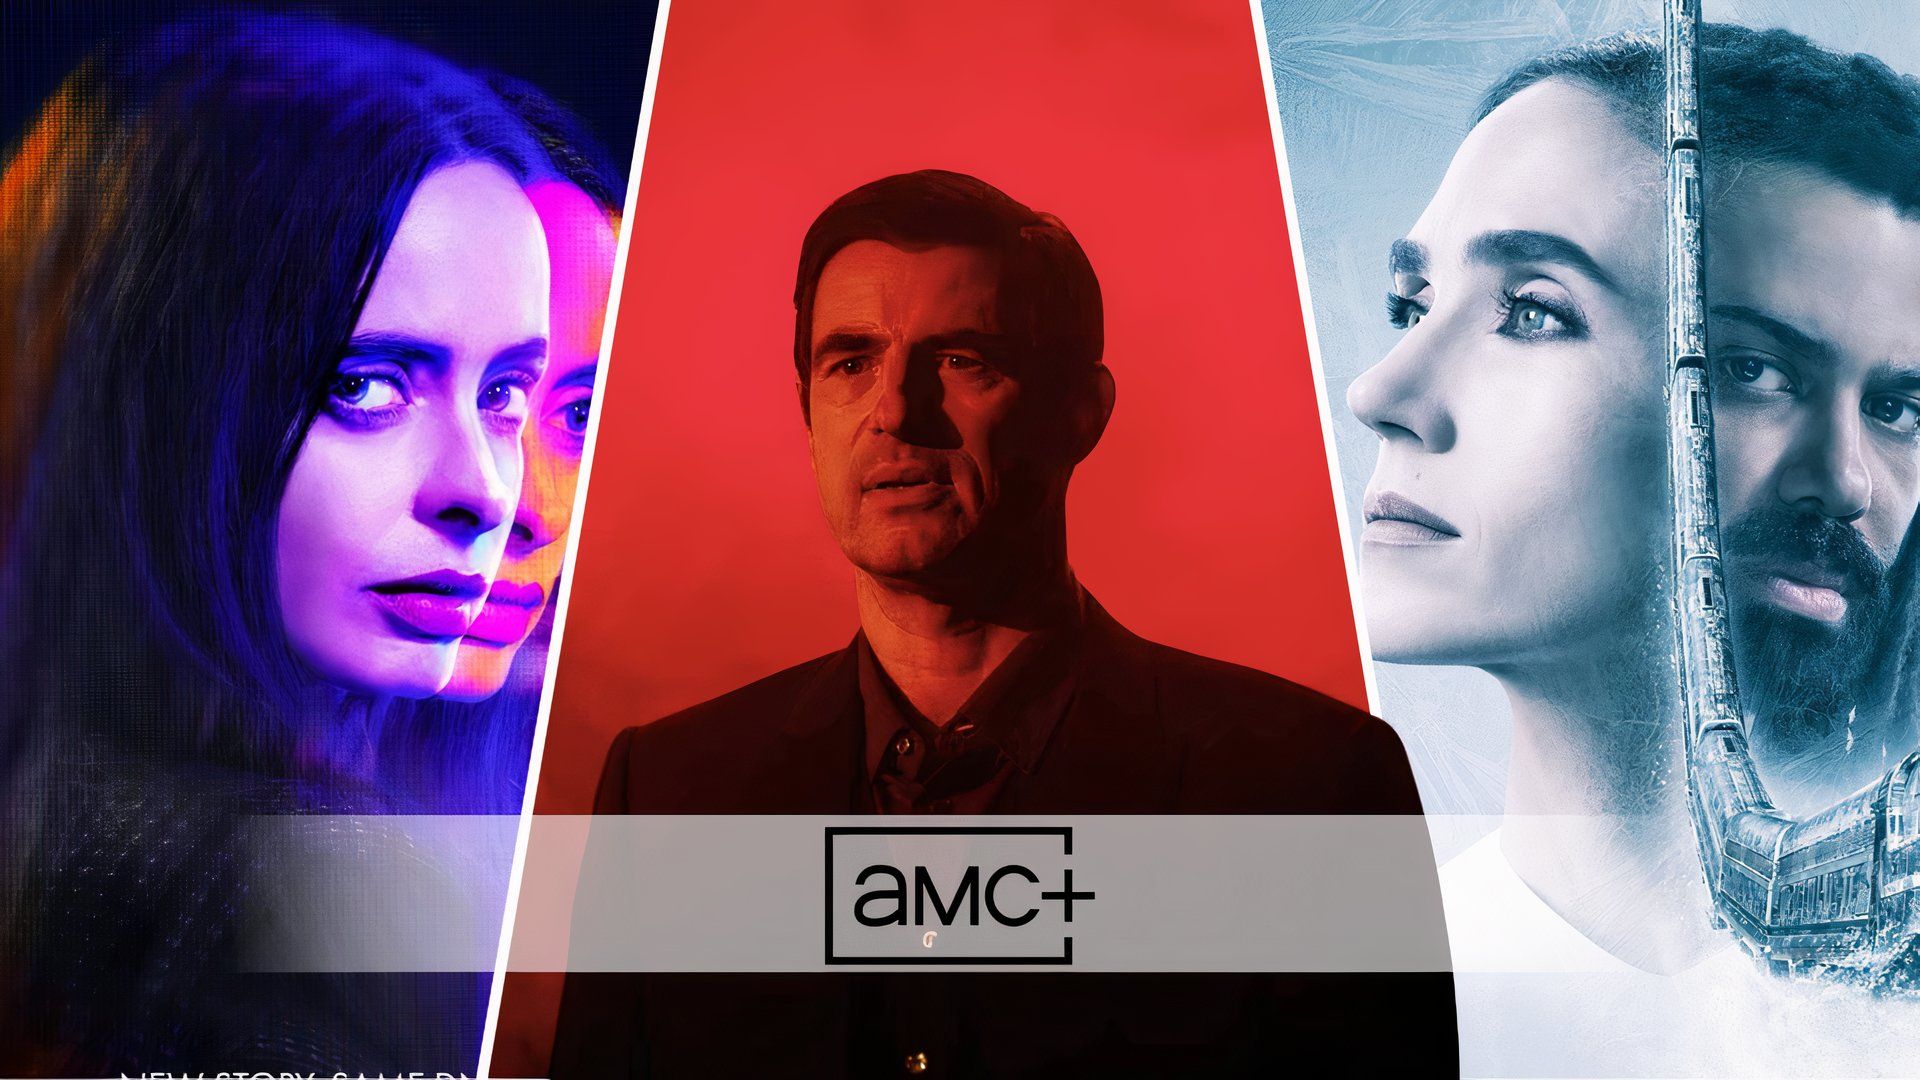 An edited image of three TV shows with the AMC+ logo including Snowpiercer, Dracula, and Orphan Black: Echoes